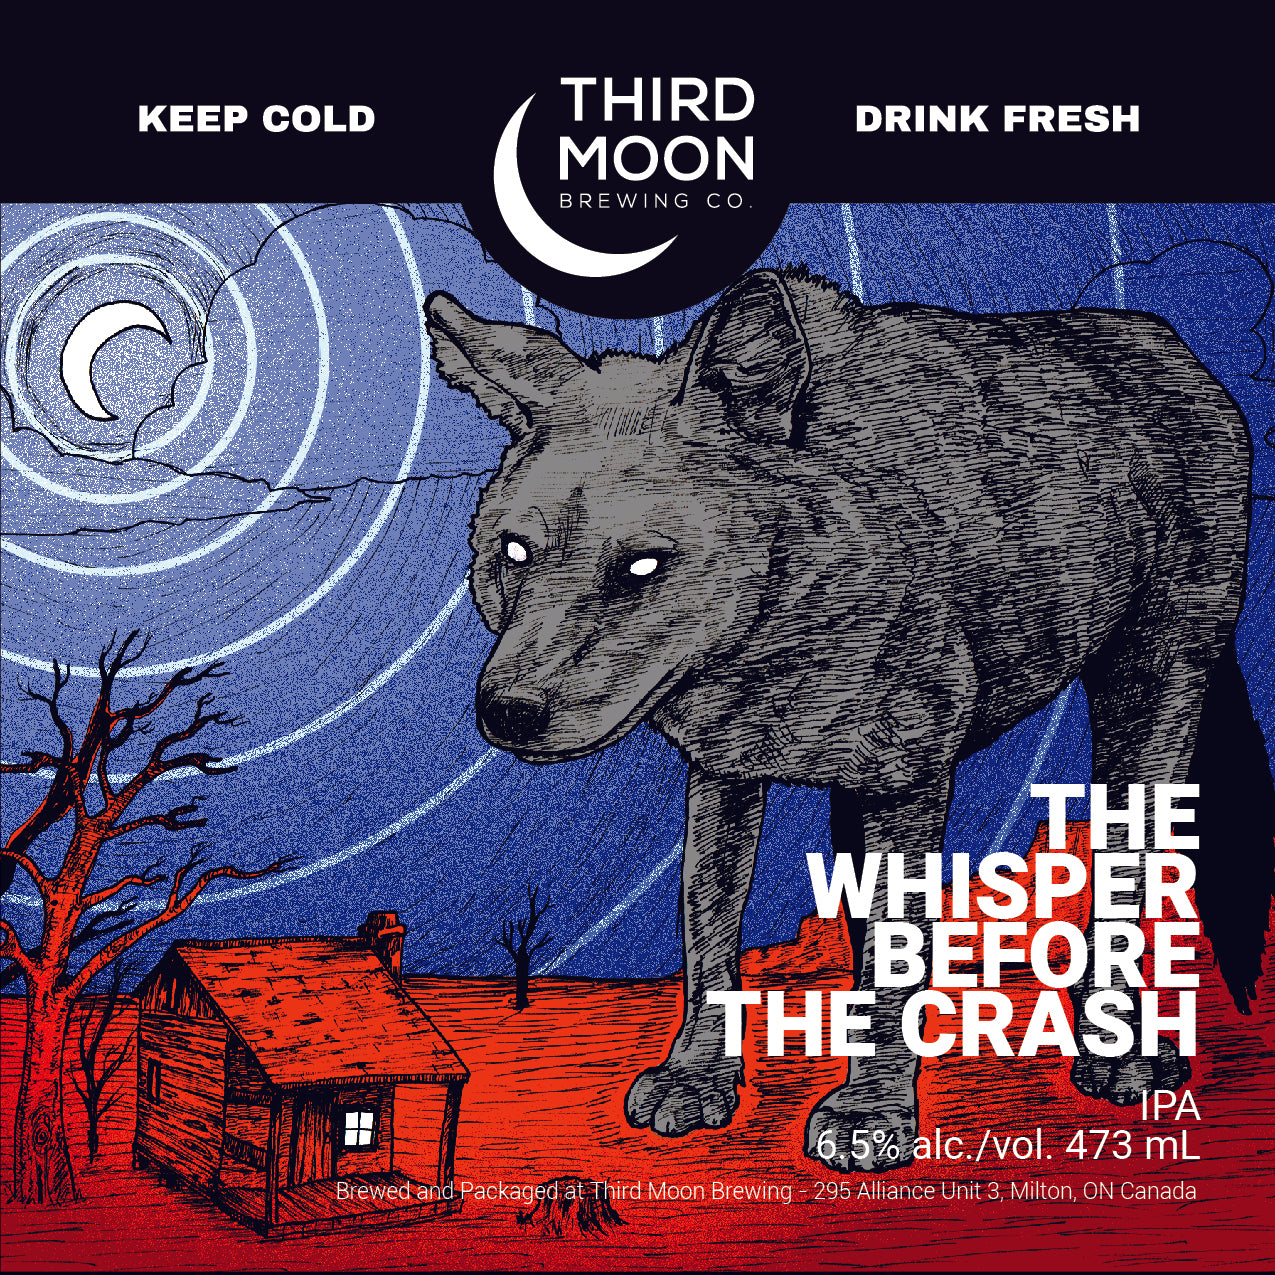 Hazy IPA - 4-pk of "The Whisper Before The Crash" tall cans